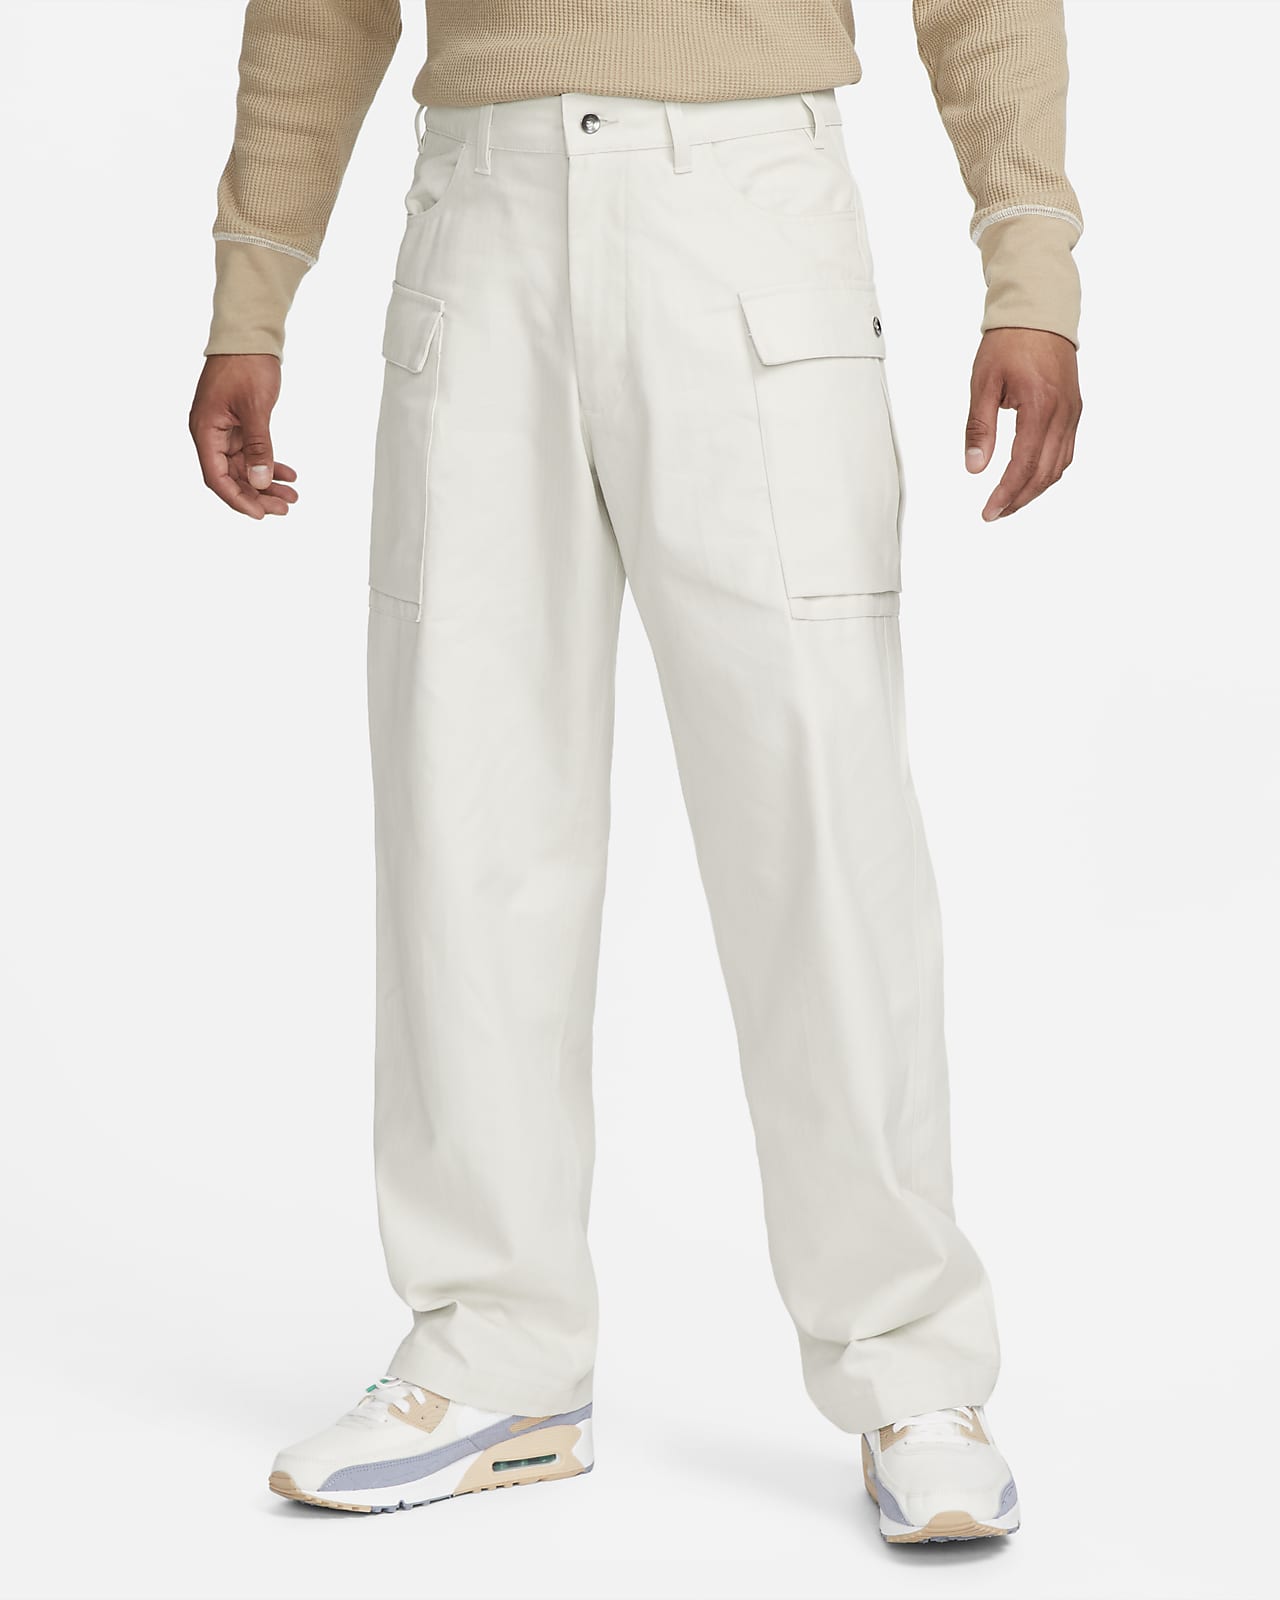 Topshop high waisted cargo trouser with utility pockets in white | ASOS